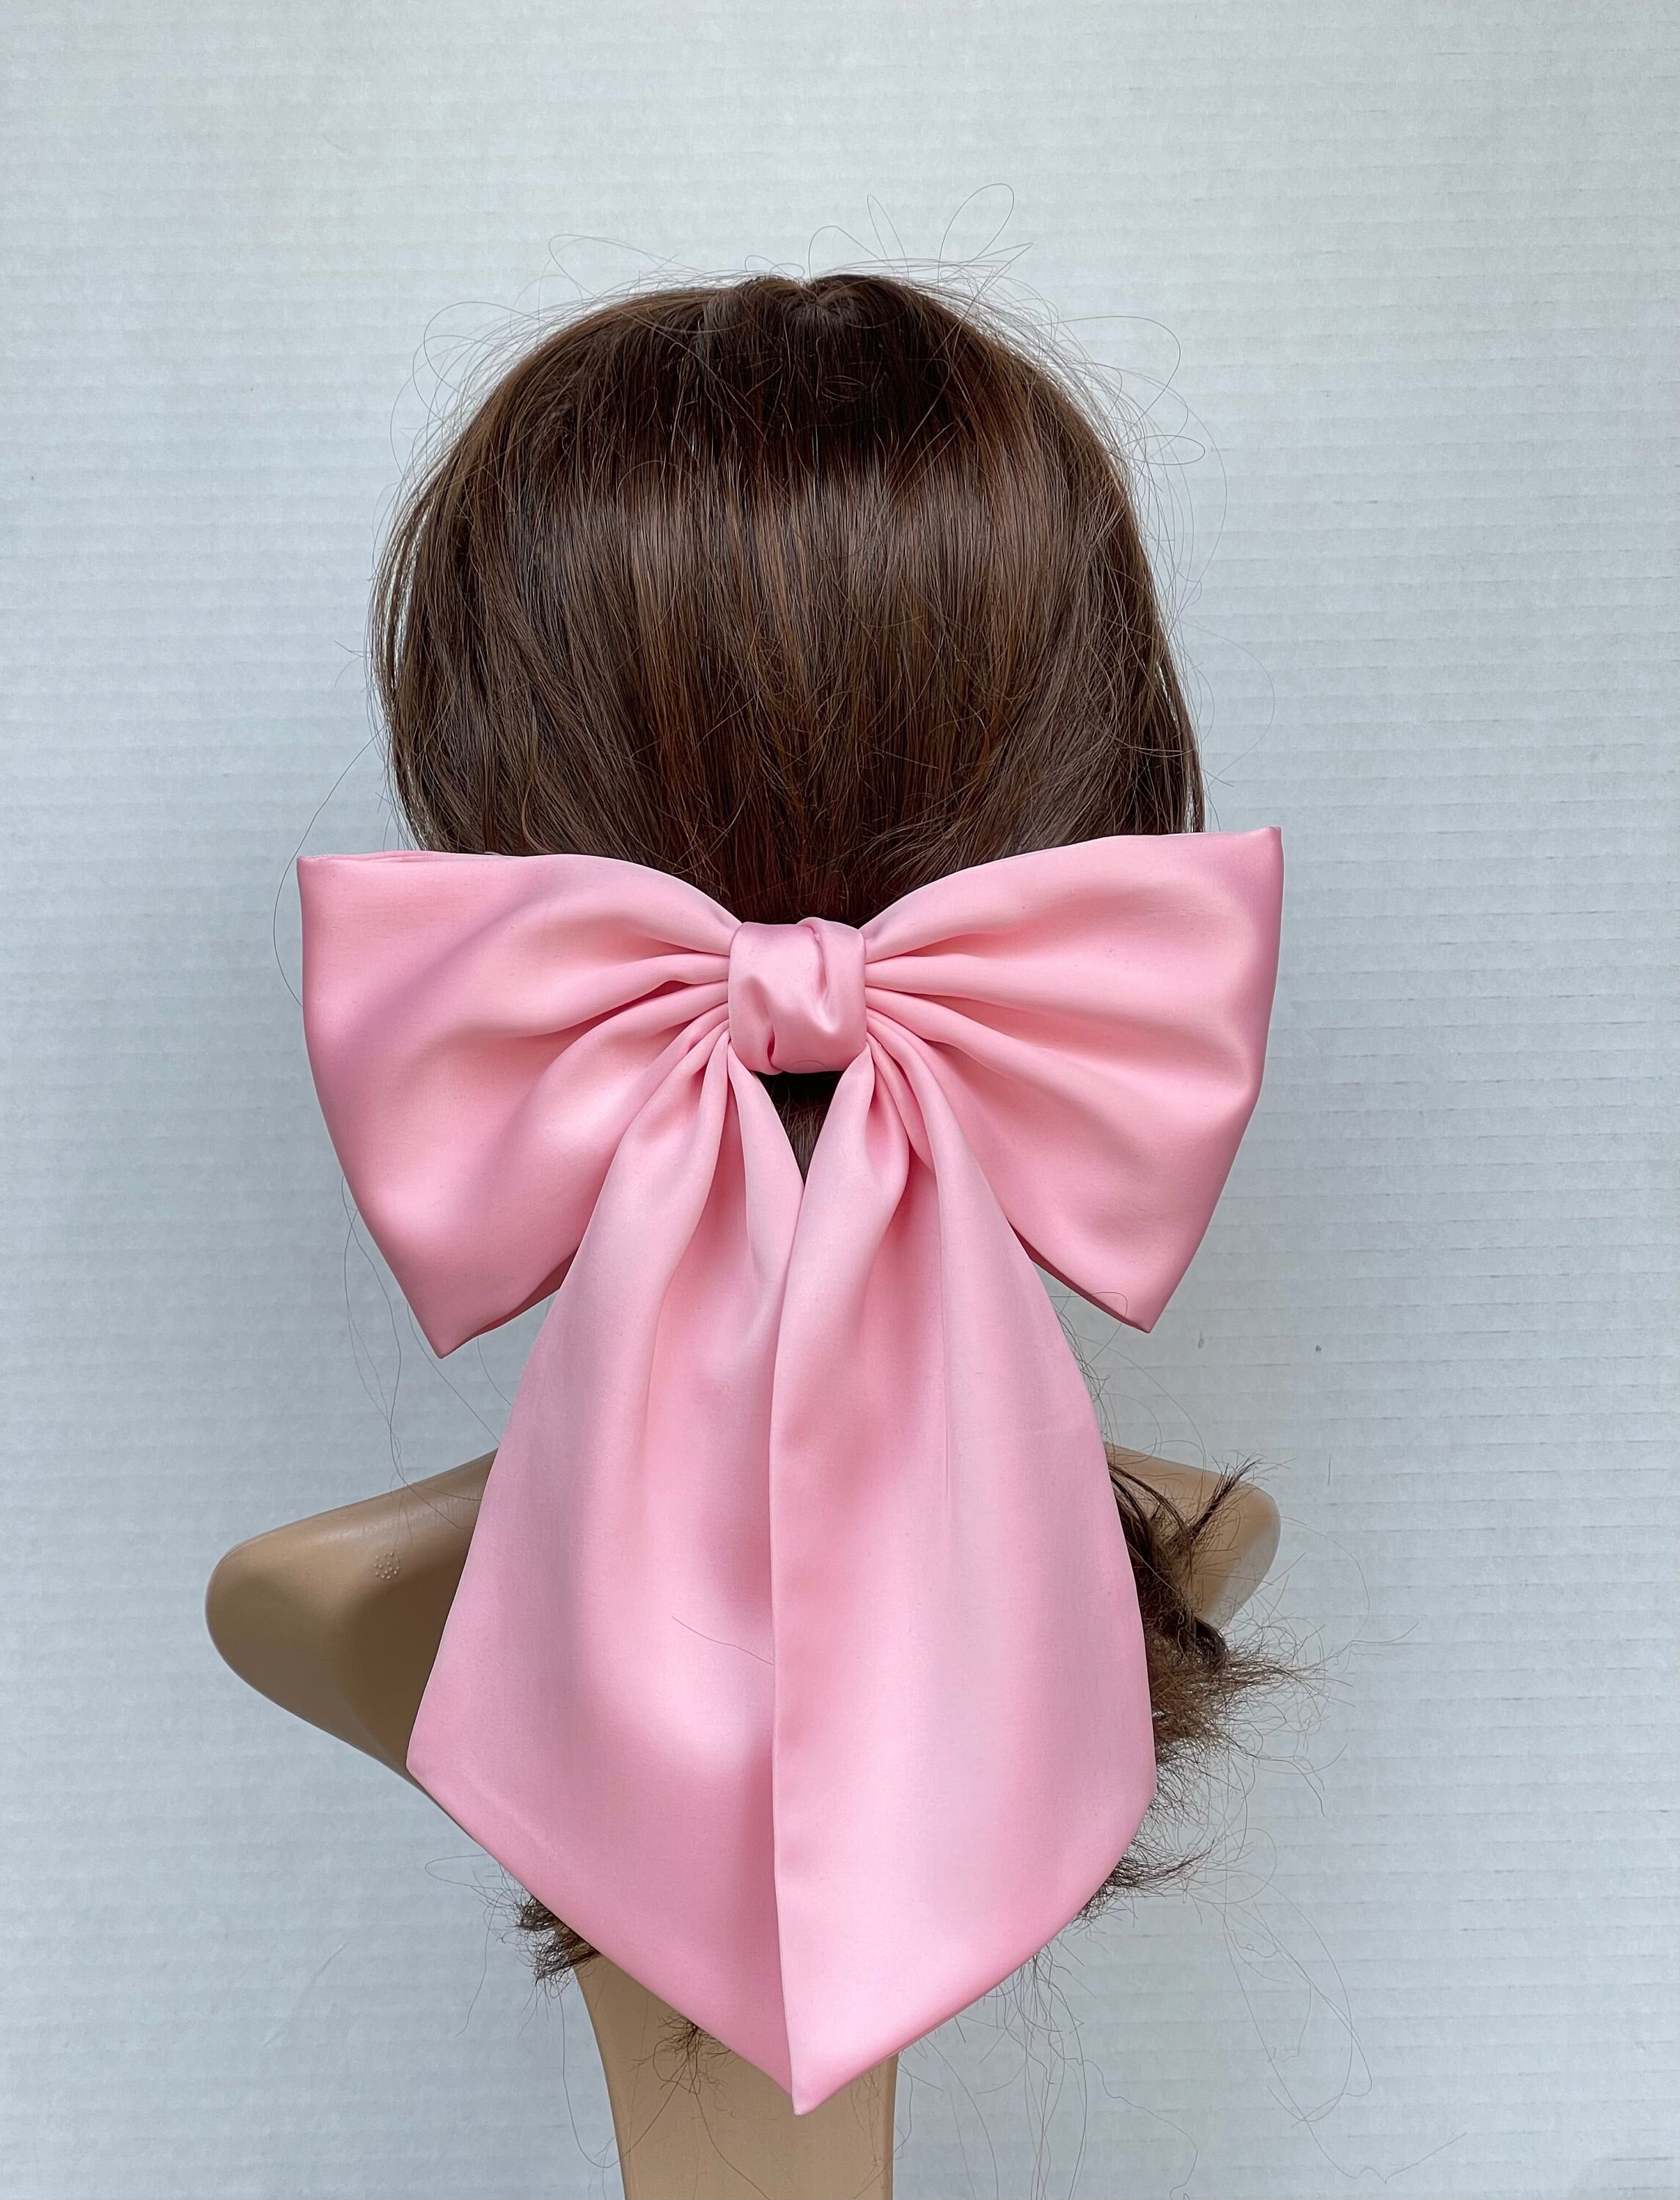 Pink Hair Bow, 8 Inch Bow Hair Gift For Girls, Rhinestone Bow, Big Pink  Bow, Large Jumbo Bow, Light Pink Hair Bow (Light Pink/Rhinestone)